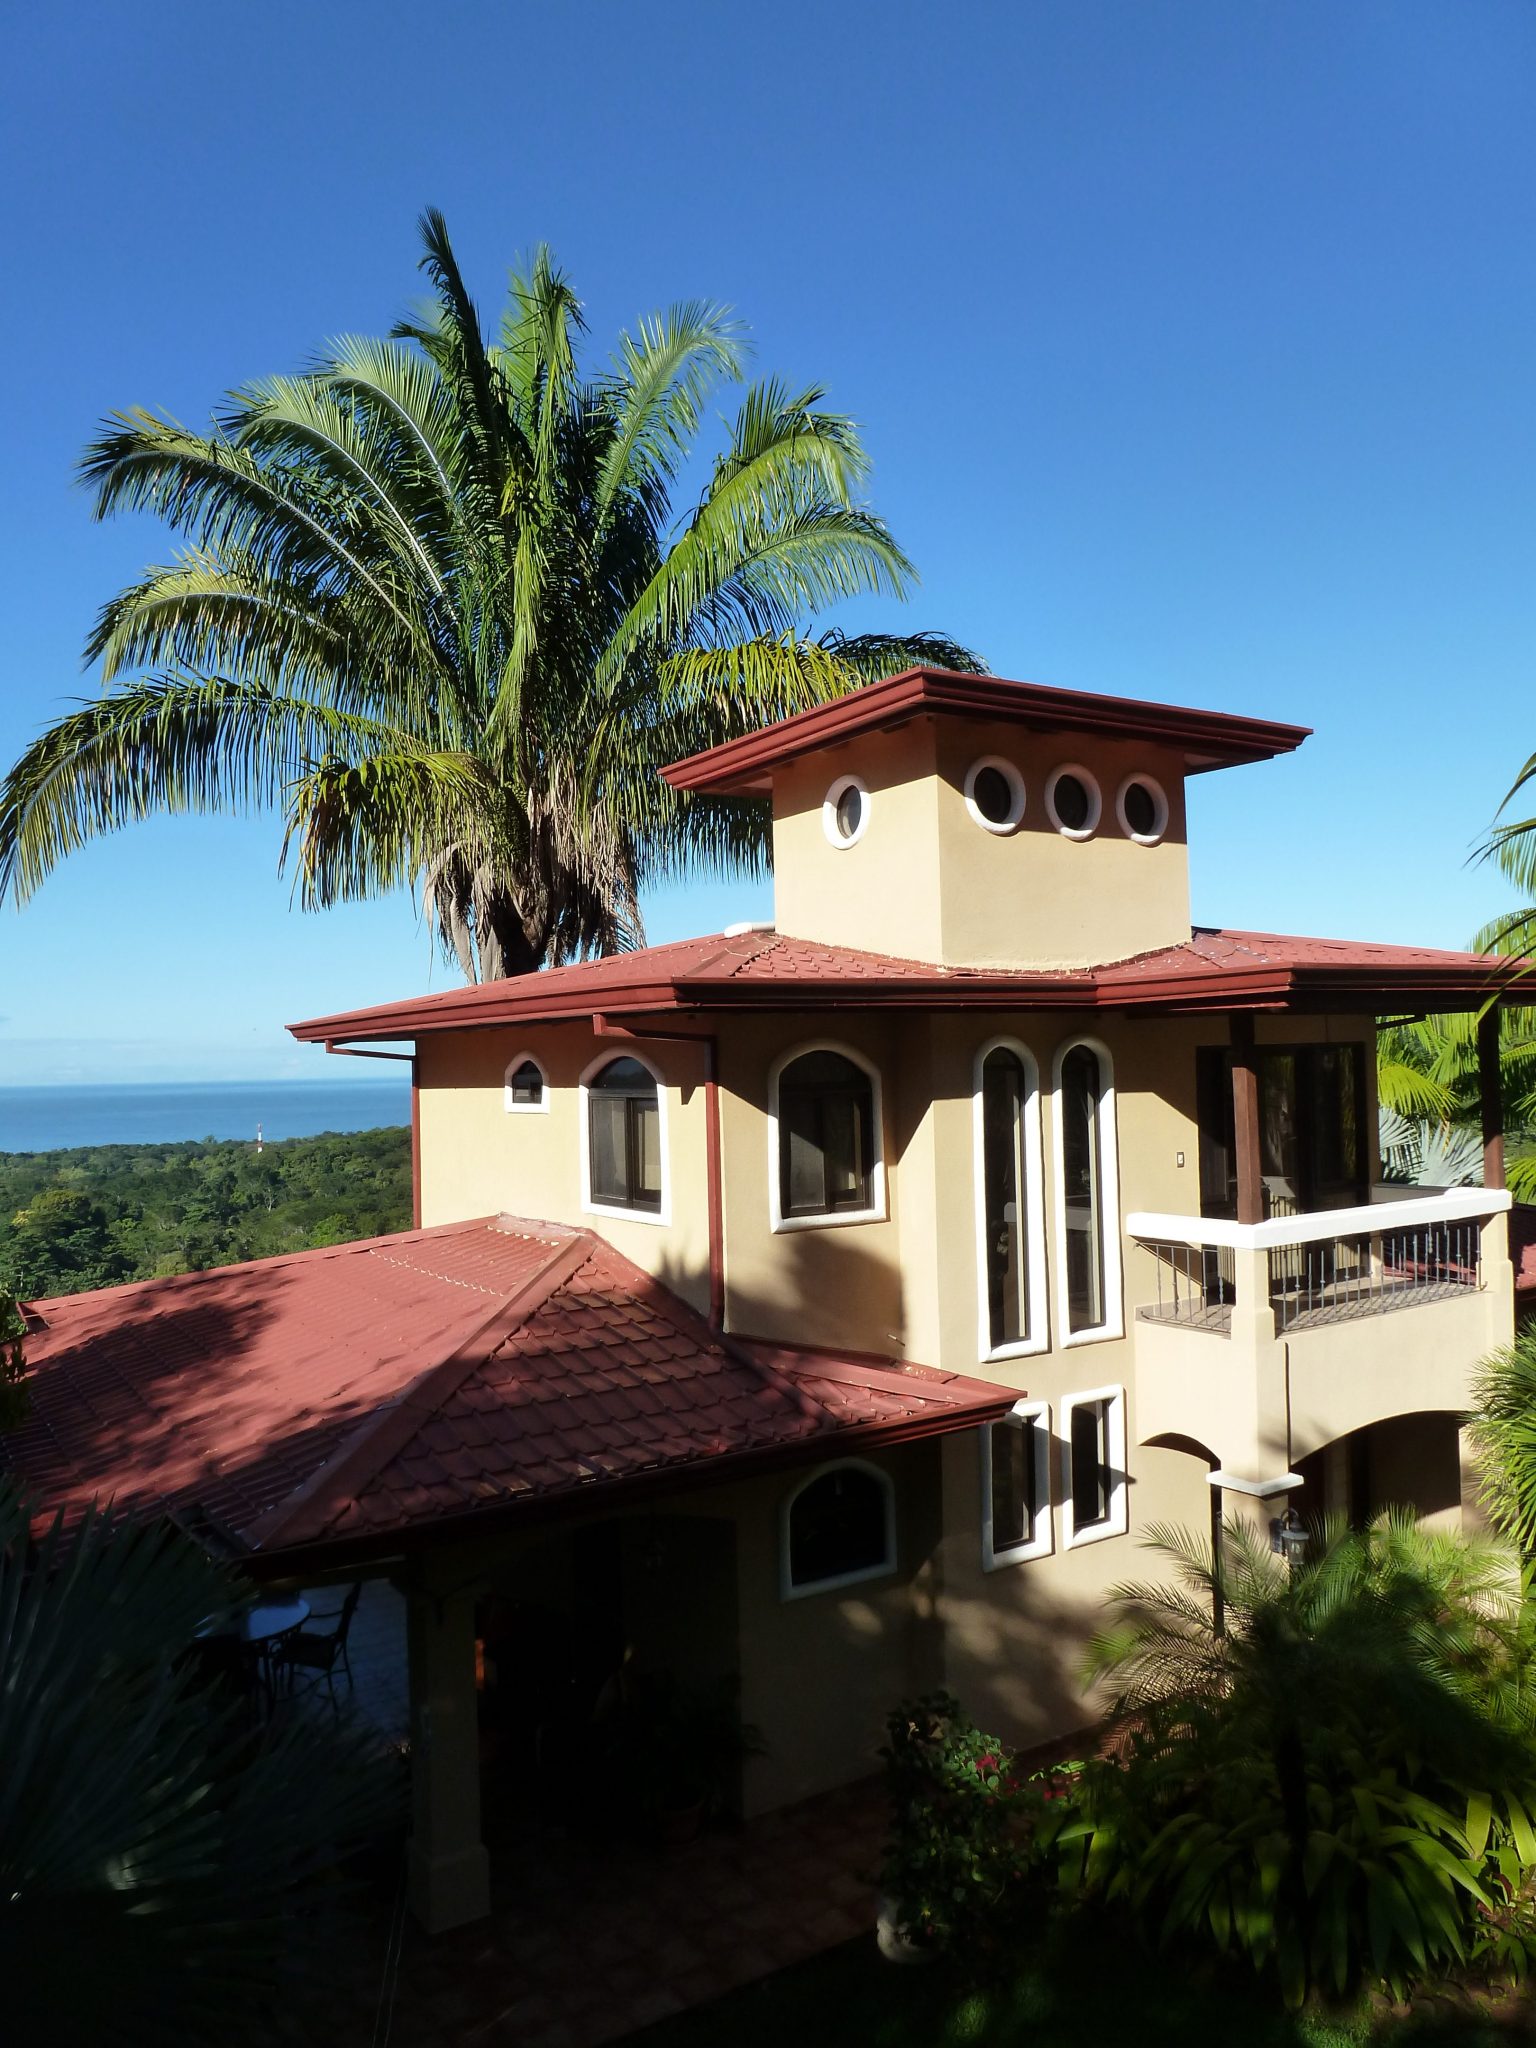 0.86 ACRES - 2 Bedroom Ocean View Home Plus Two Bedroom Cabin & Pool - Income Property Dream Home!!